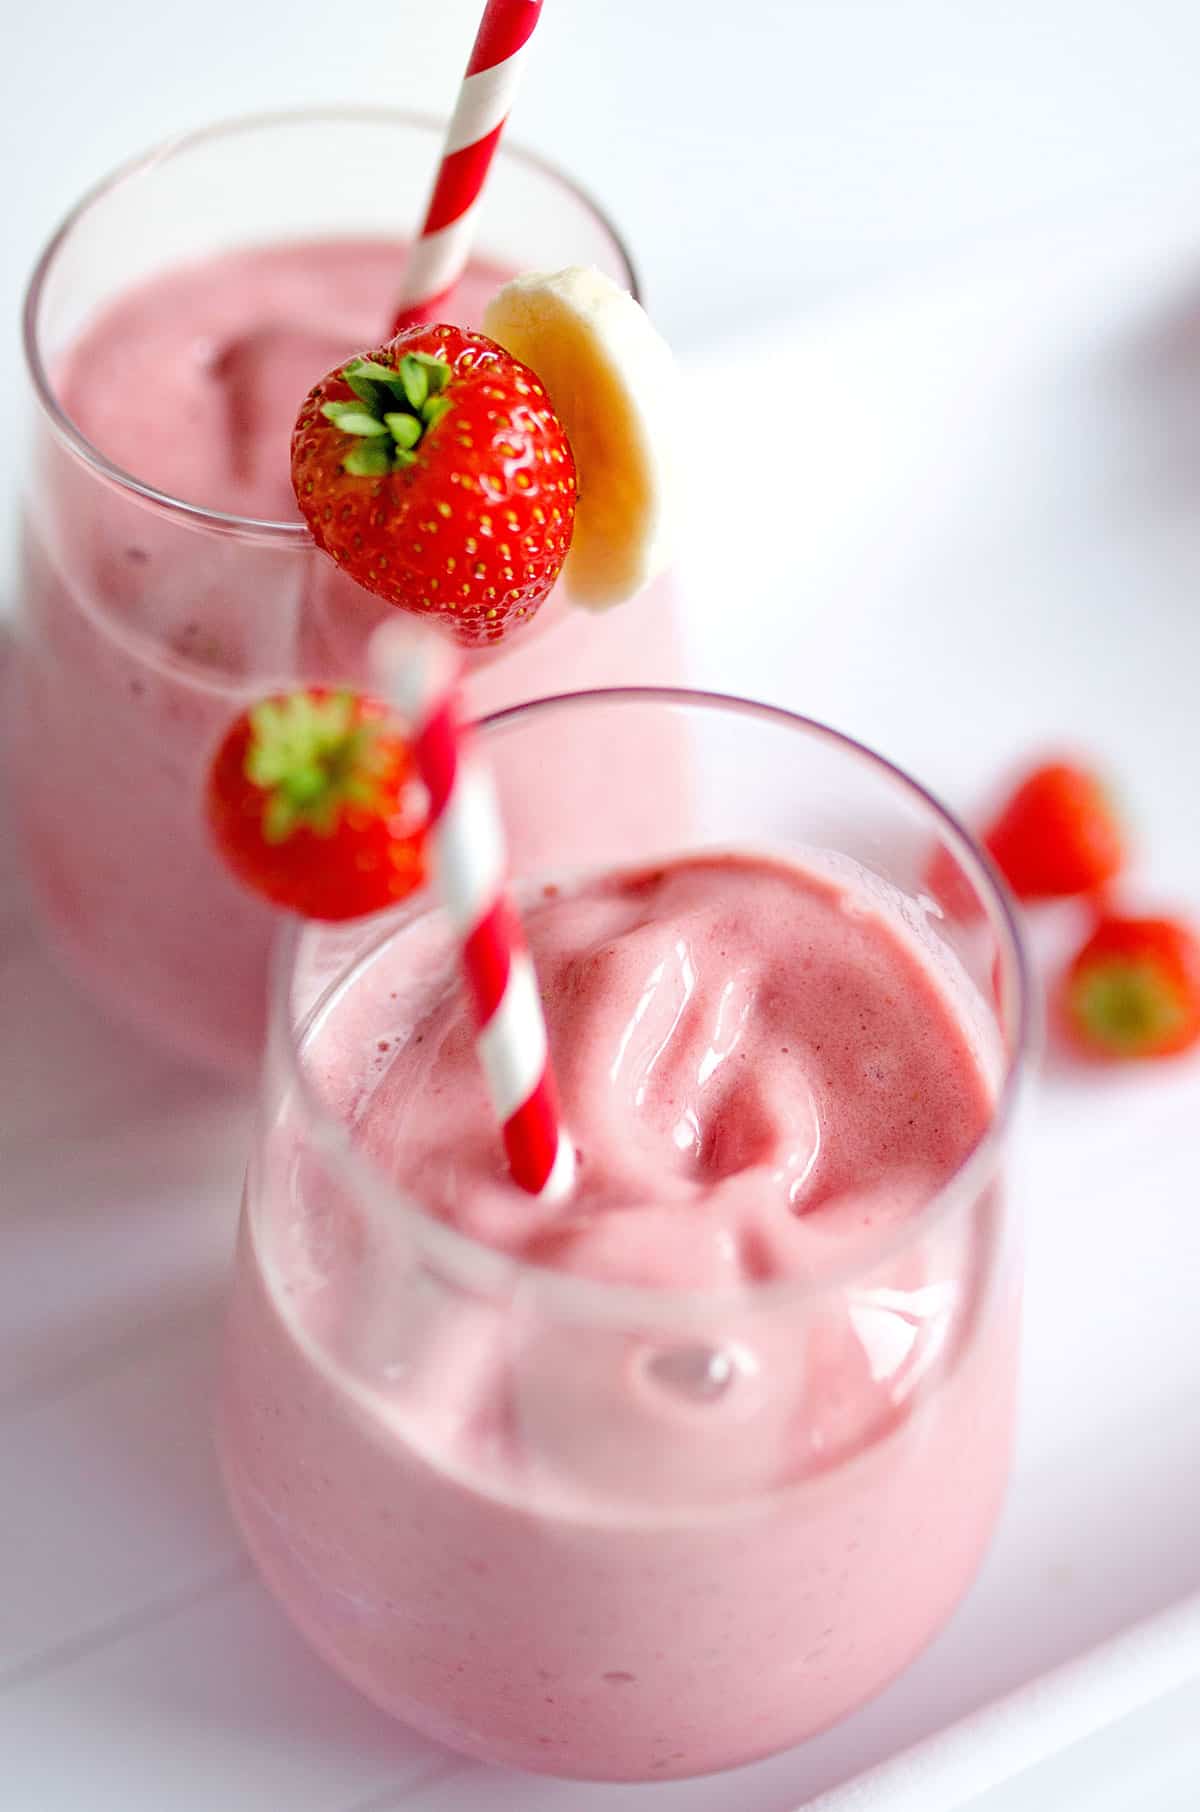 Strawberry banana smoothie with a straw in a glass from above.